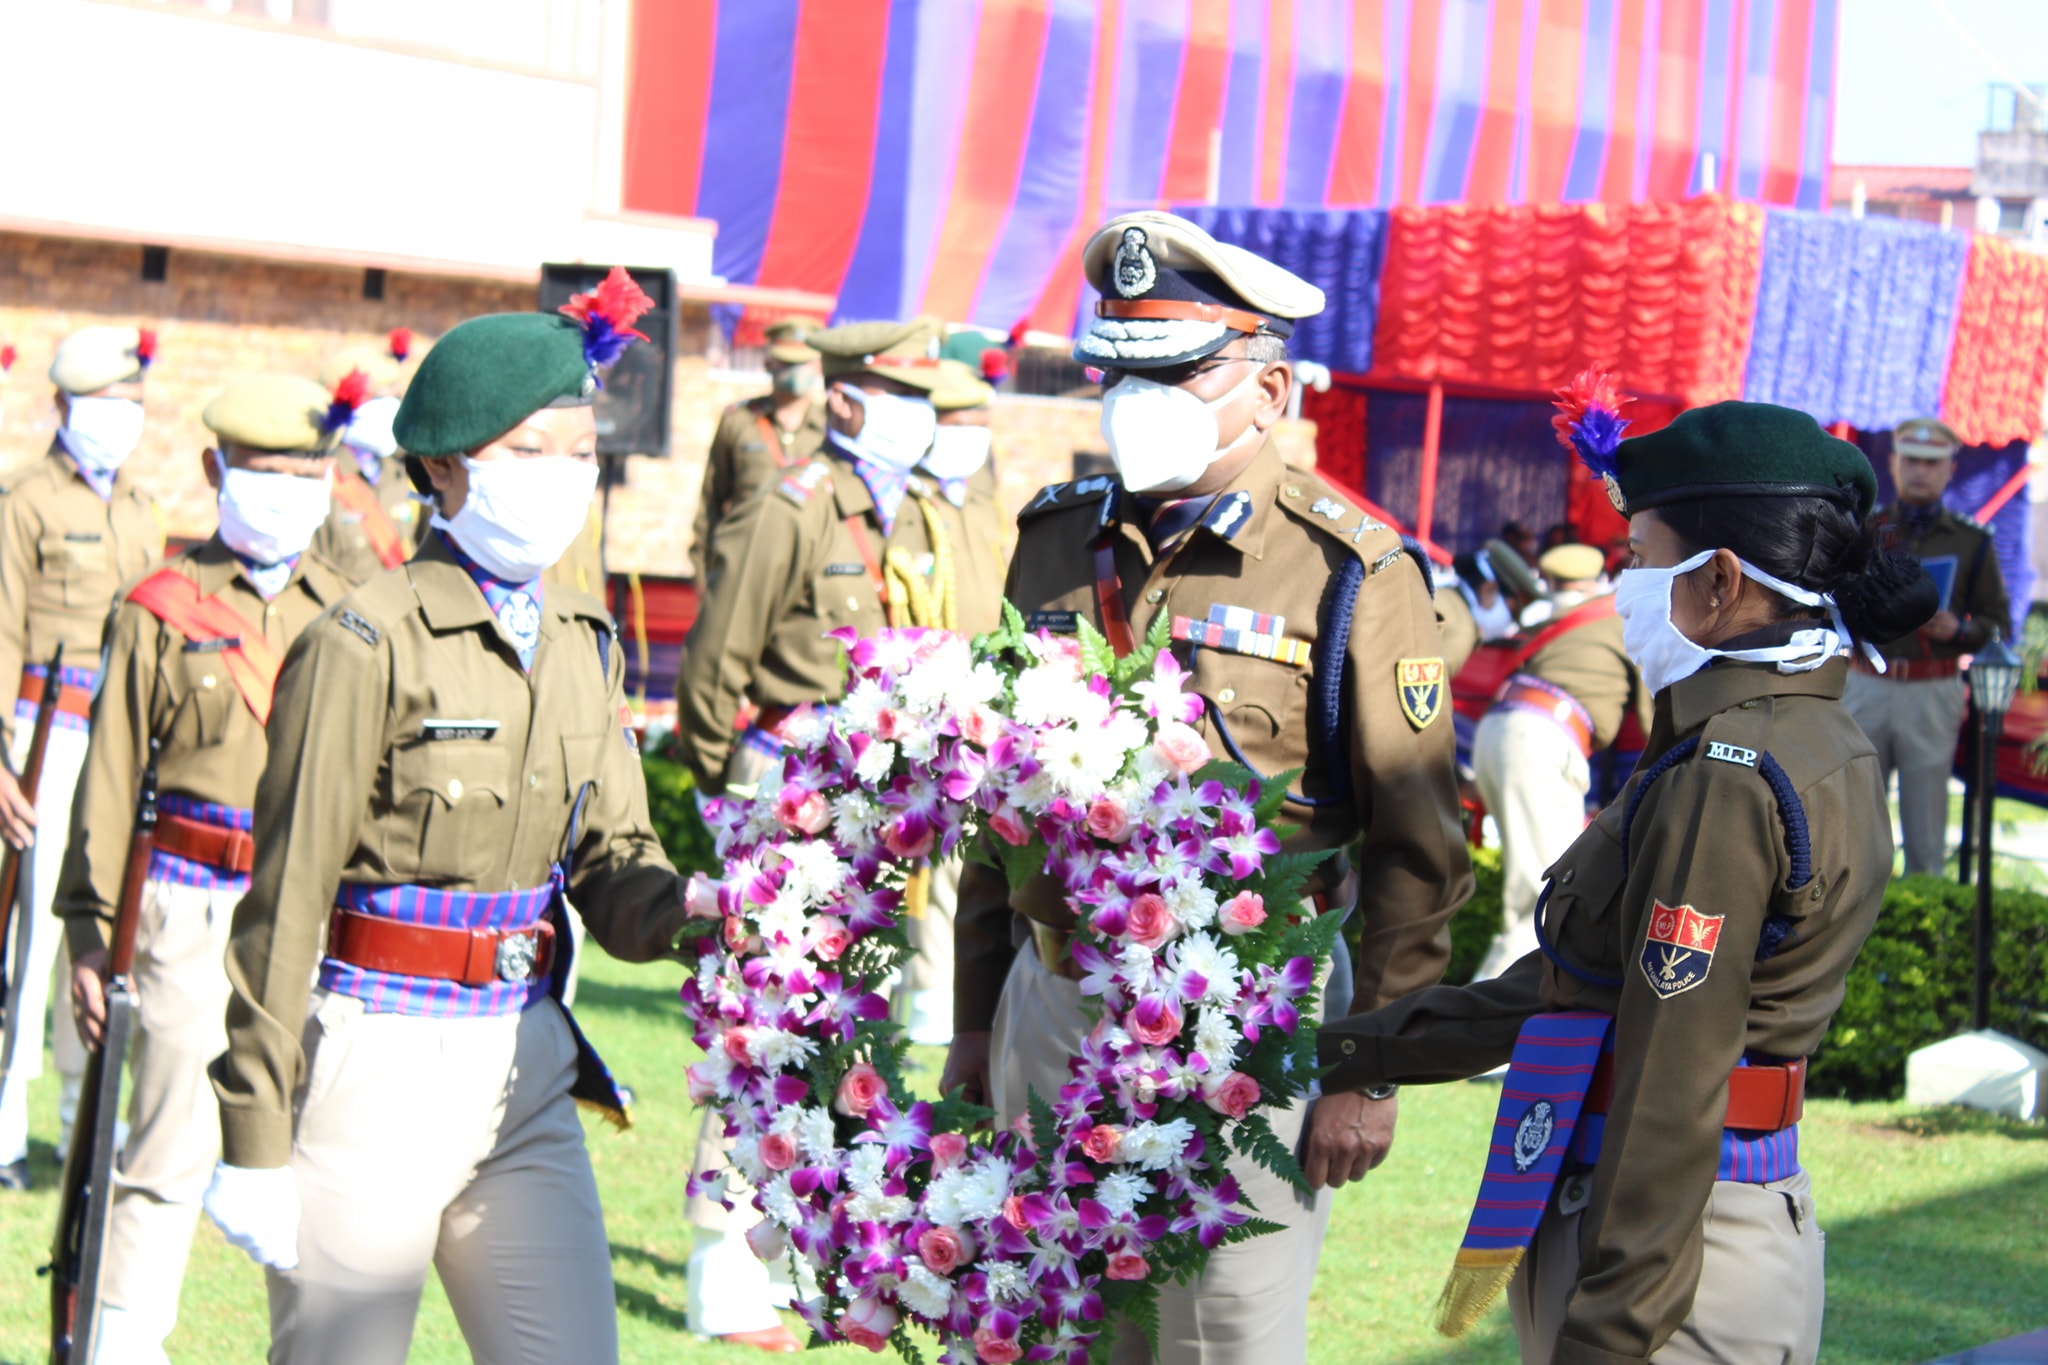 Police Commemoration Day is observed today the 21st October , 2020, by East Khasi Hills DEF at Police Reserve Shillong